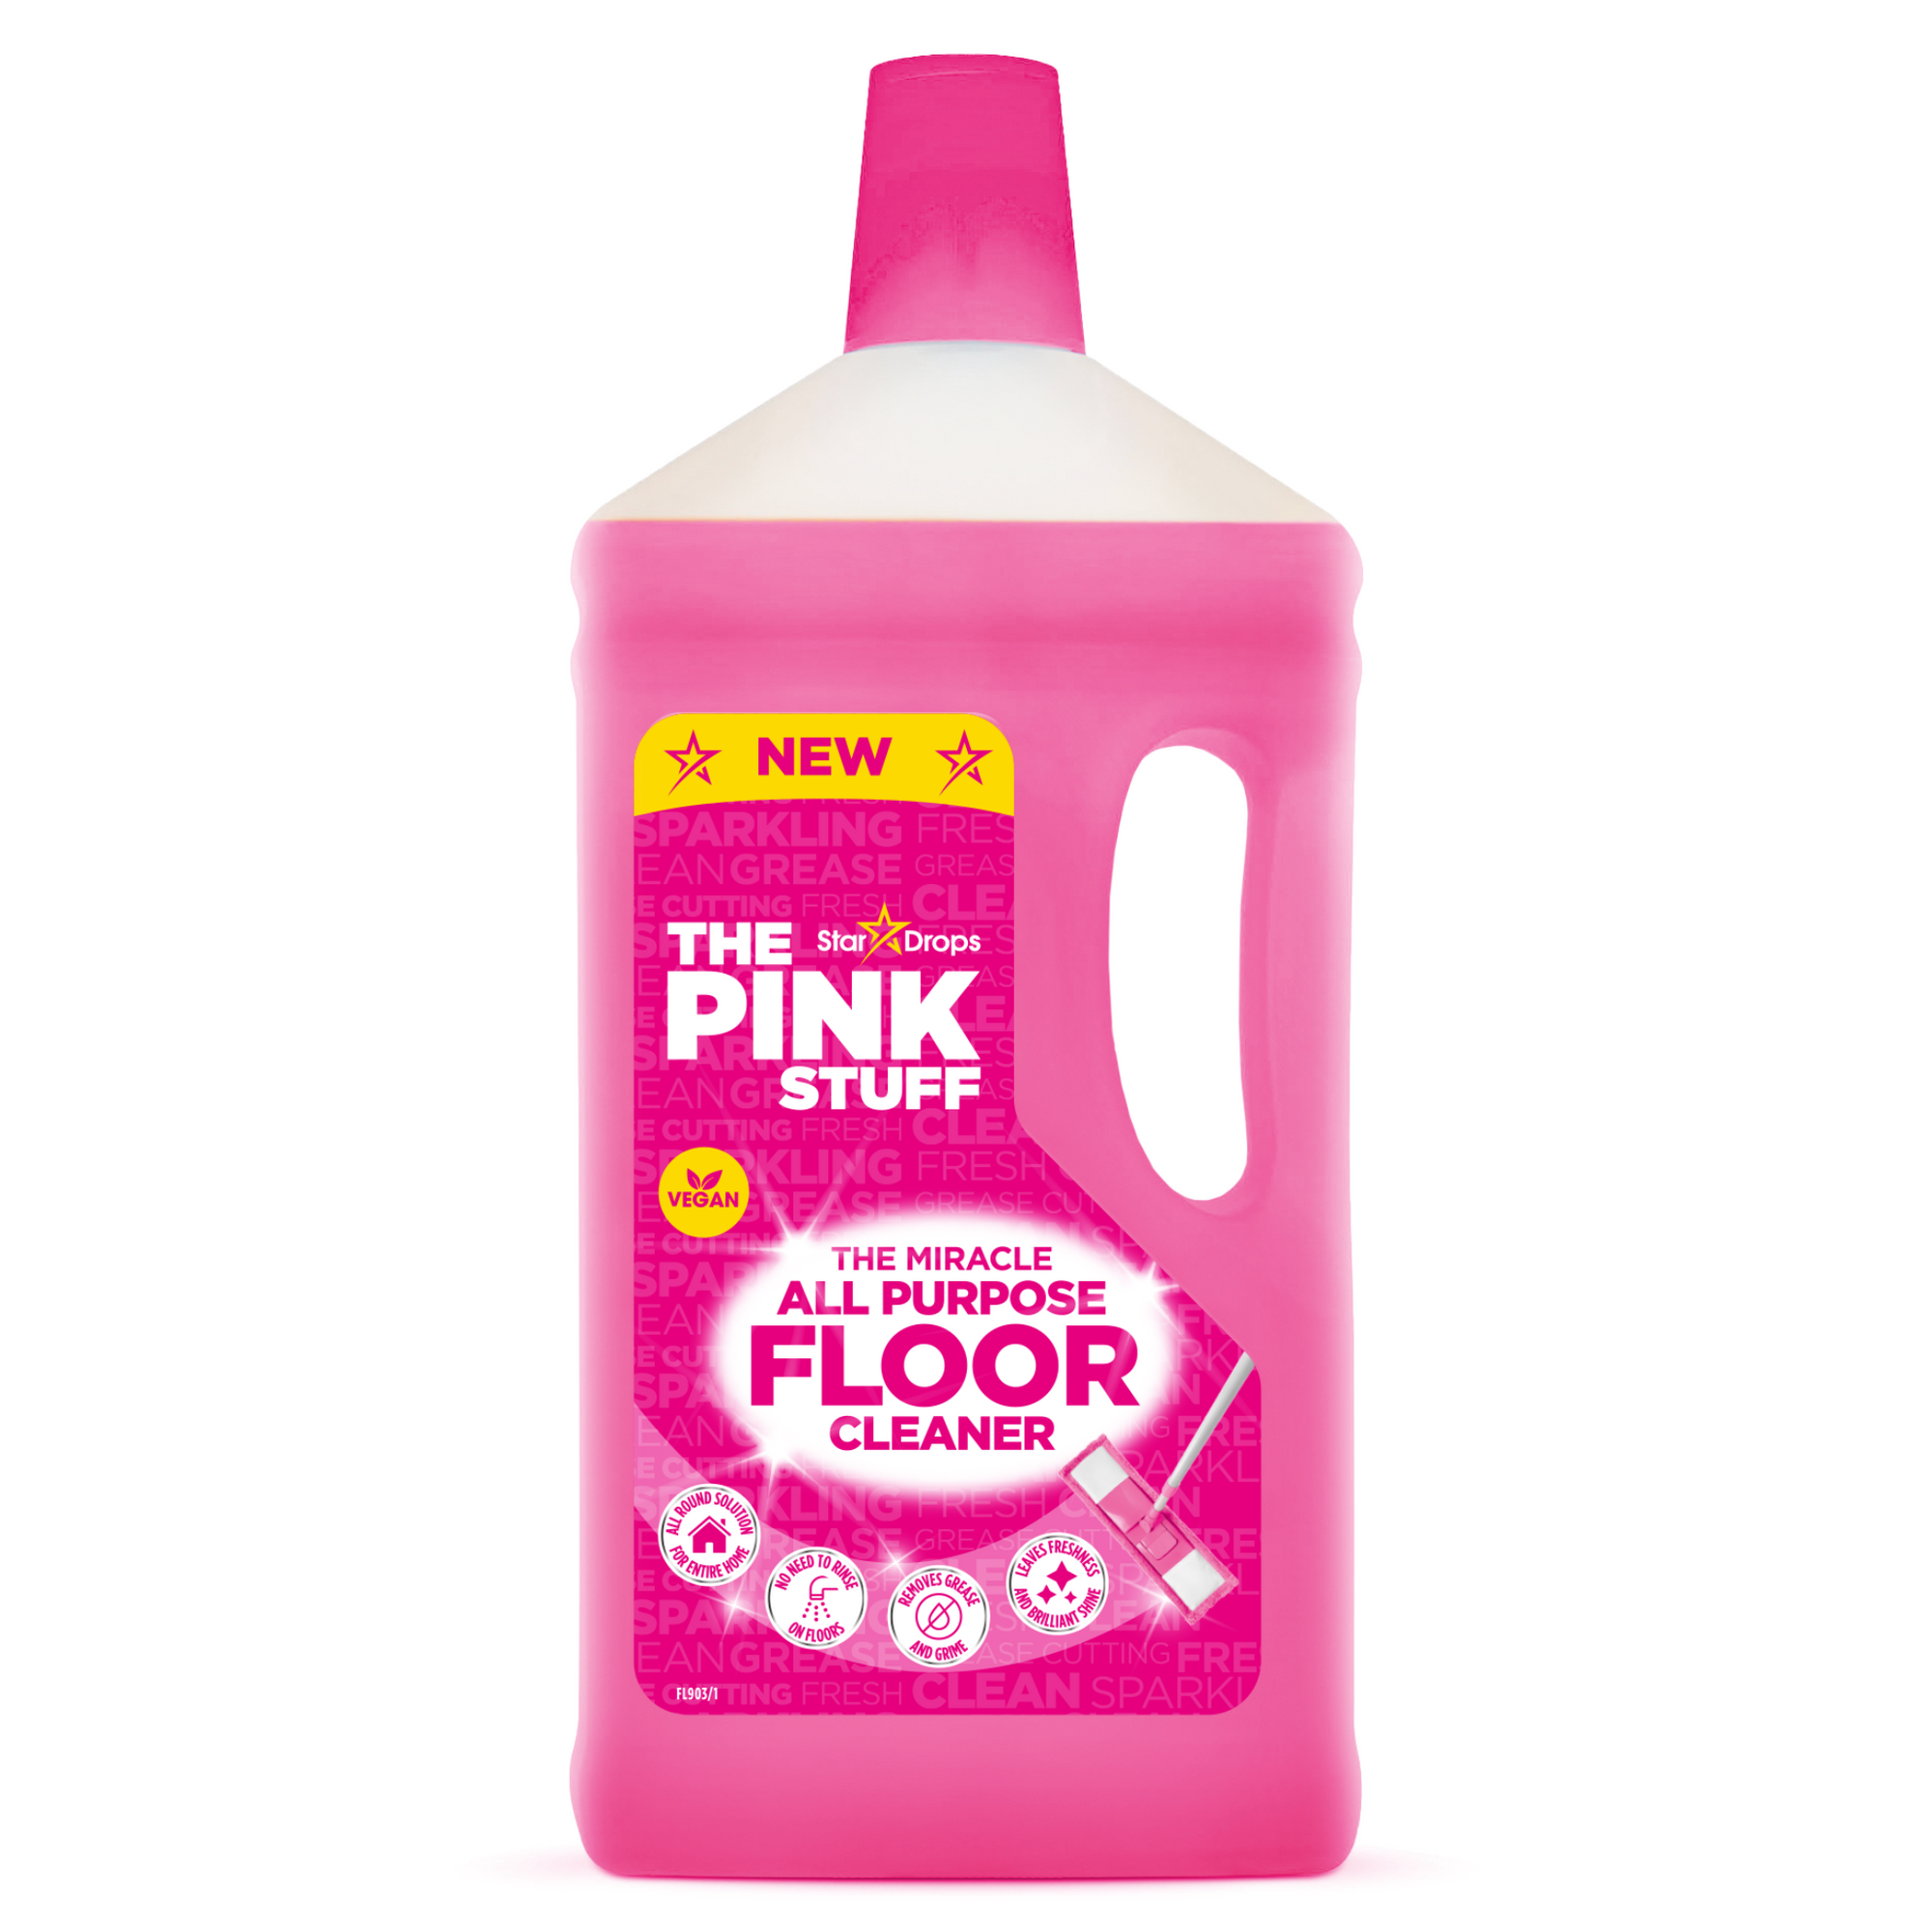 The Pink Stuff - The Miracle All Purpose Floor Cleaner (1L)